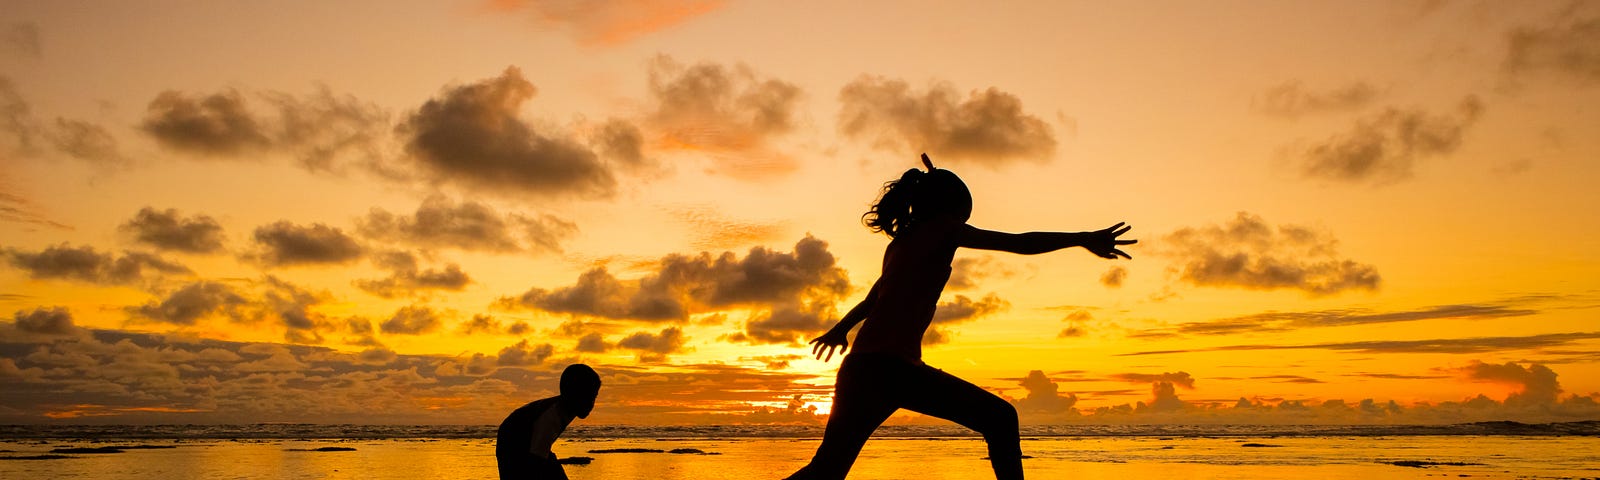 photo of two children playing on the shore, during sunset. The silhouettes of the children show one jumping to the water, and the other standing in the shallow water, with small mounds peaking from the water’s surface, maybe grass, rock, or sand. The sunset behind them is shades of golden yellow, orange and pink, dotted with fluffy clouds.